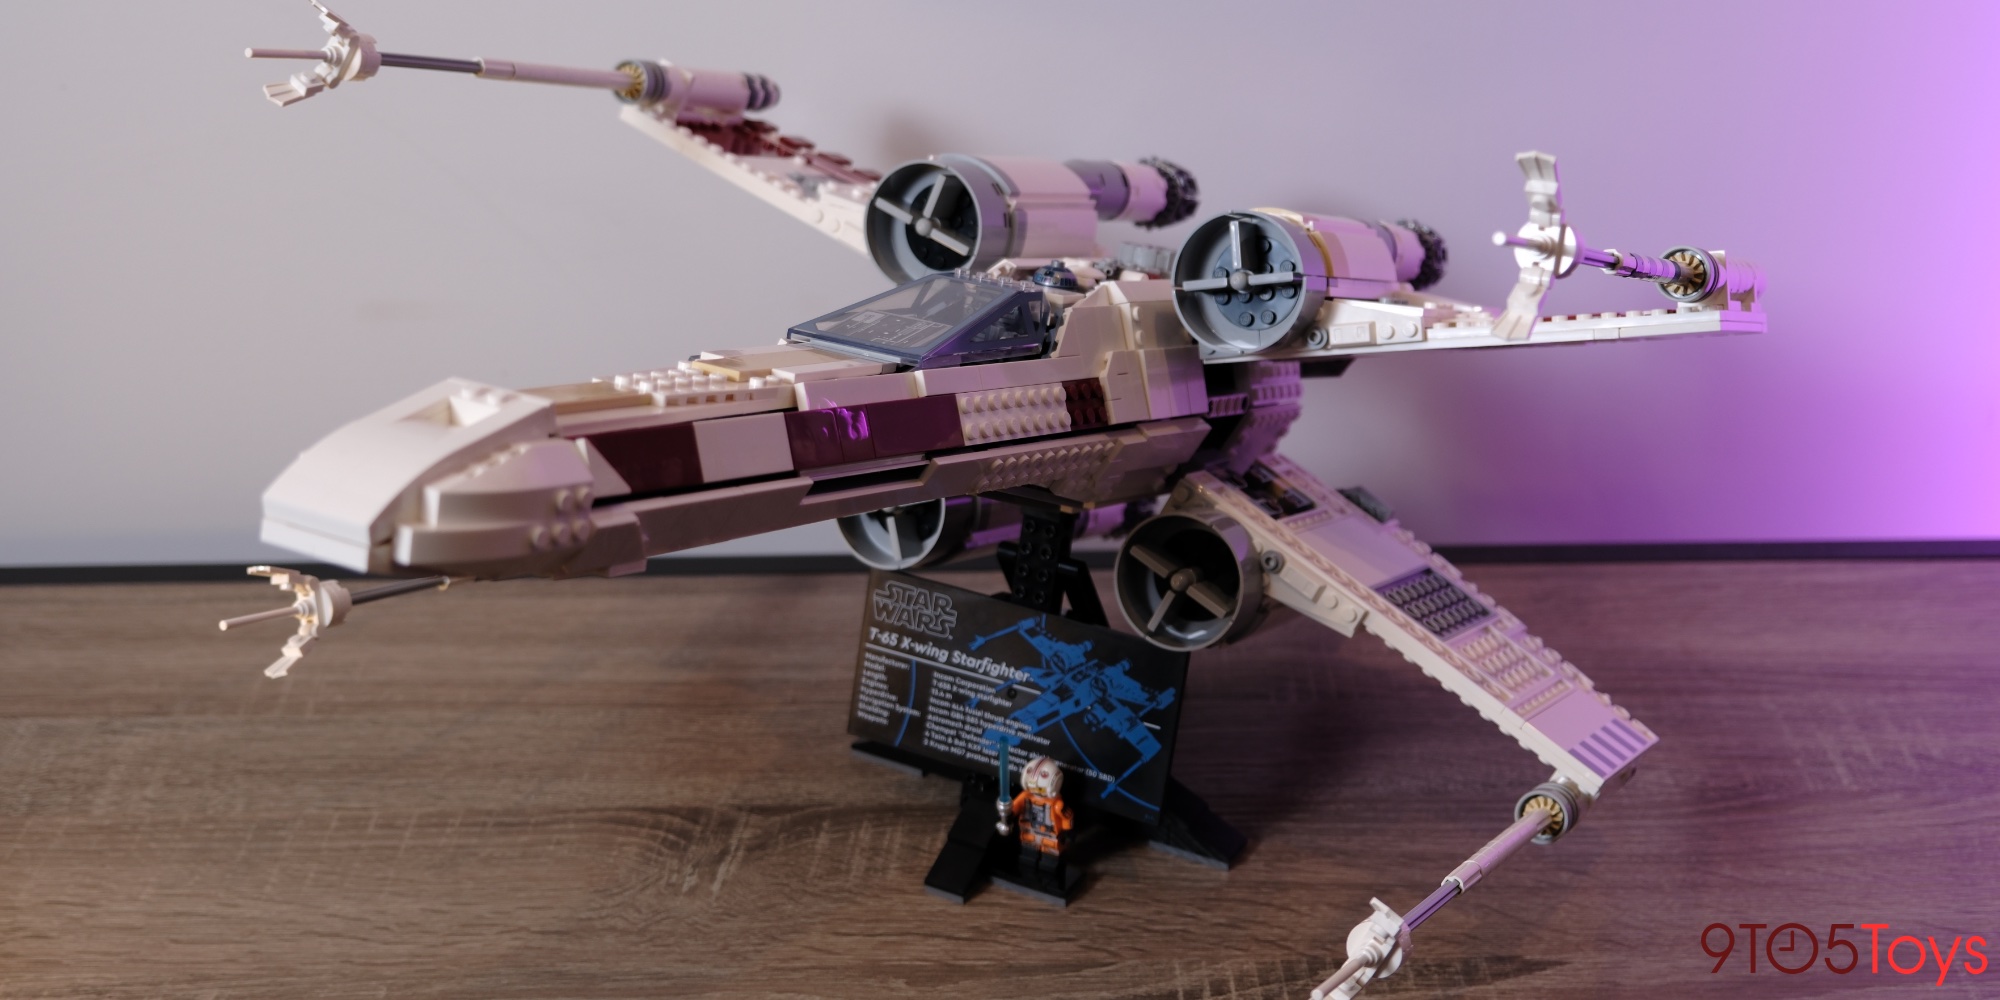 https://9to5toys.com/wp-content/uploads/sites/5/2023/05/LEGO-UCS-X-Wing-lead.jpg